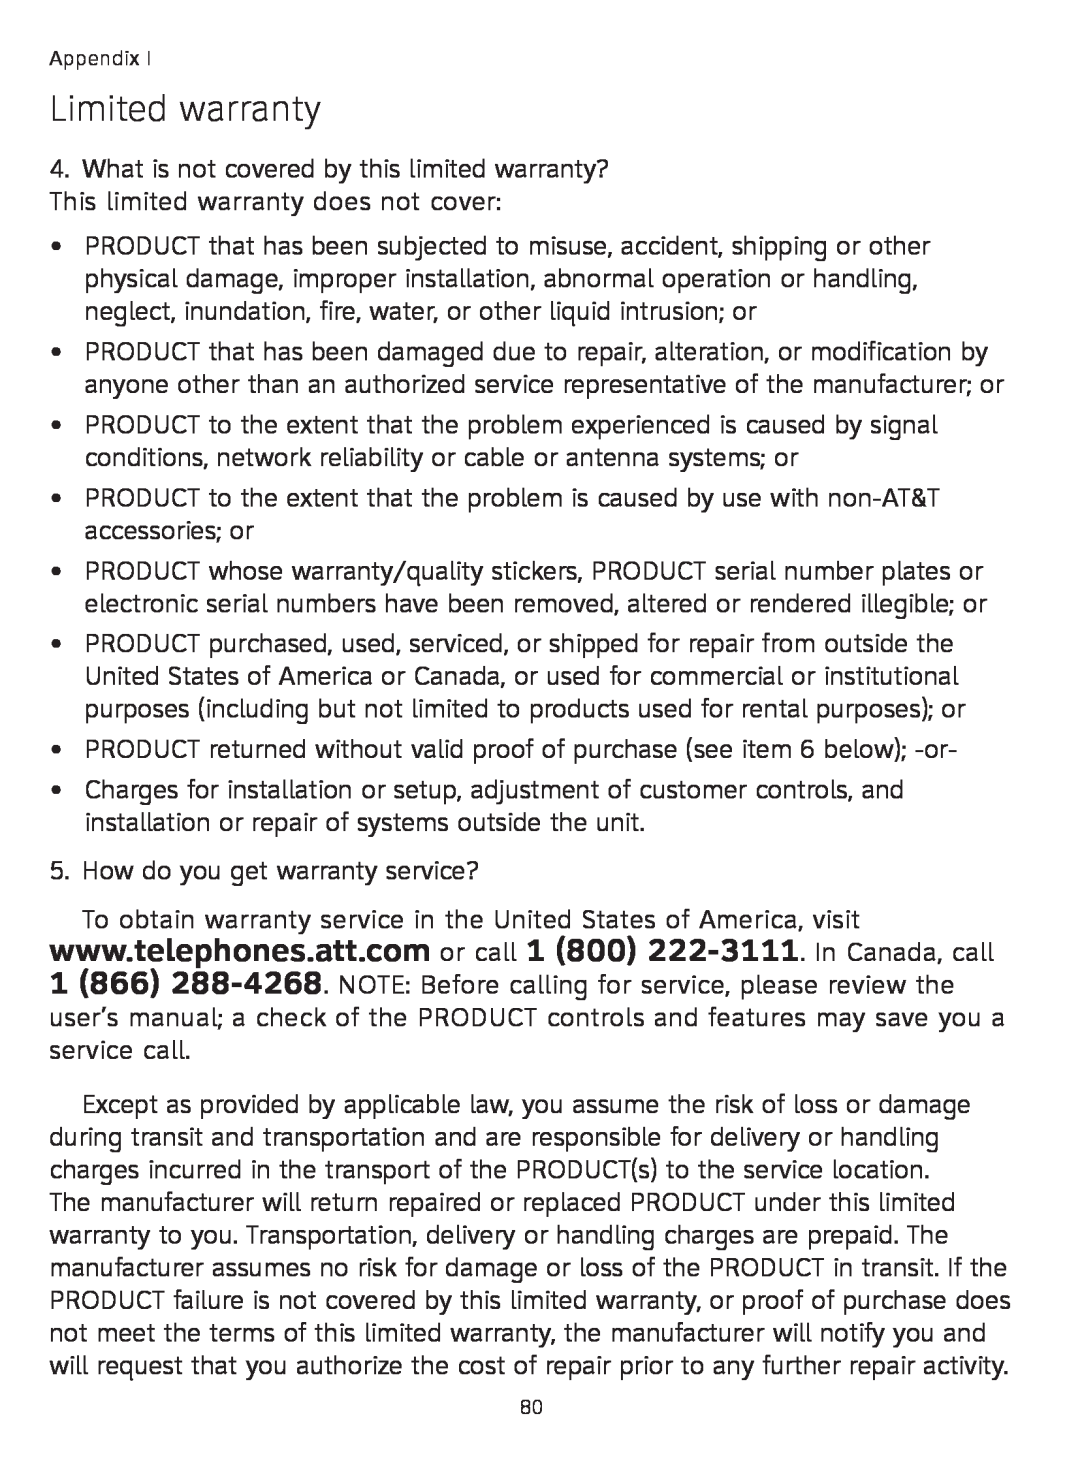 AT&T TL91378, TL9178, TL91178 Limited warranty, PRODUCT returned without valid proof of purchase see item 6 below -or 